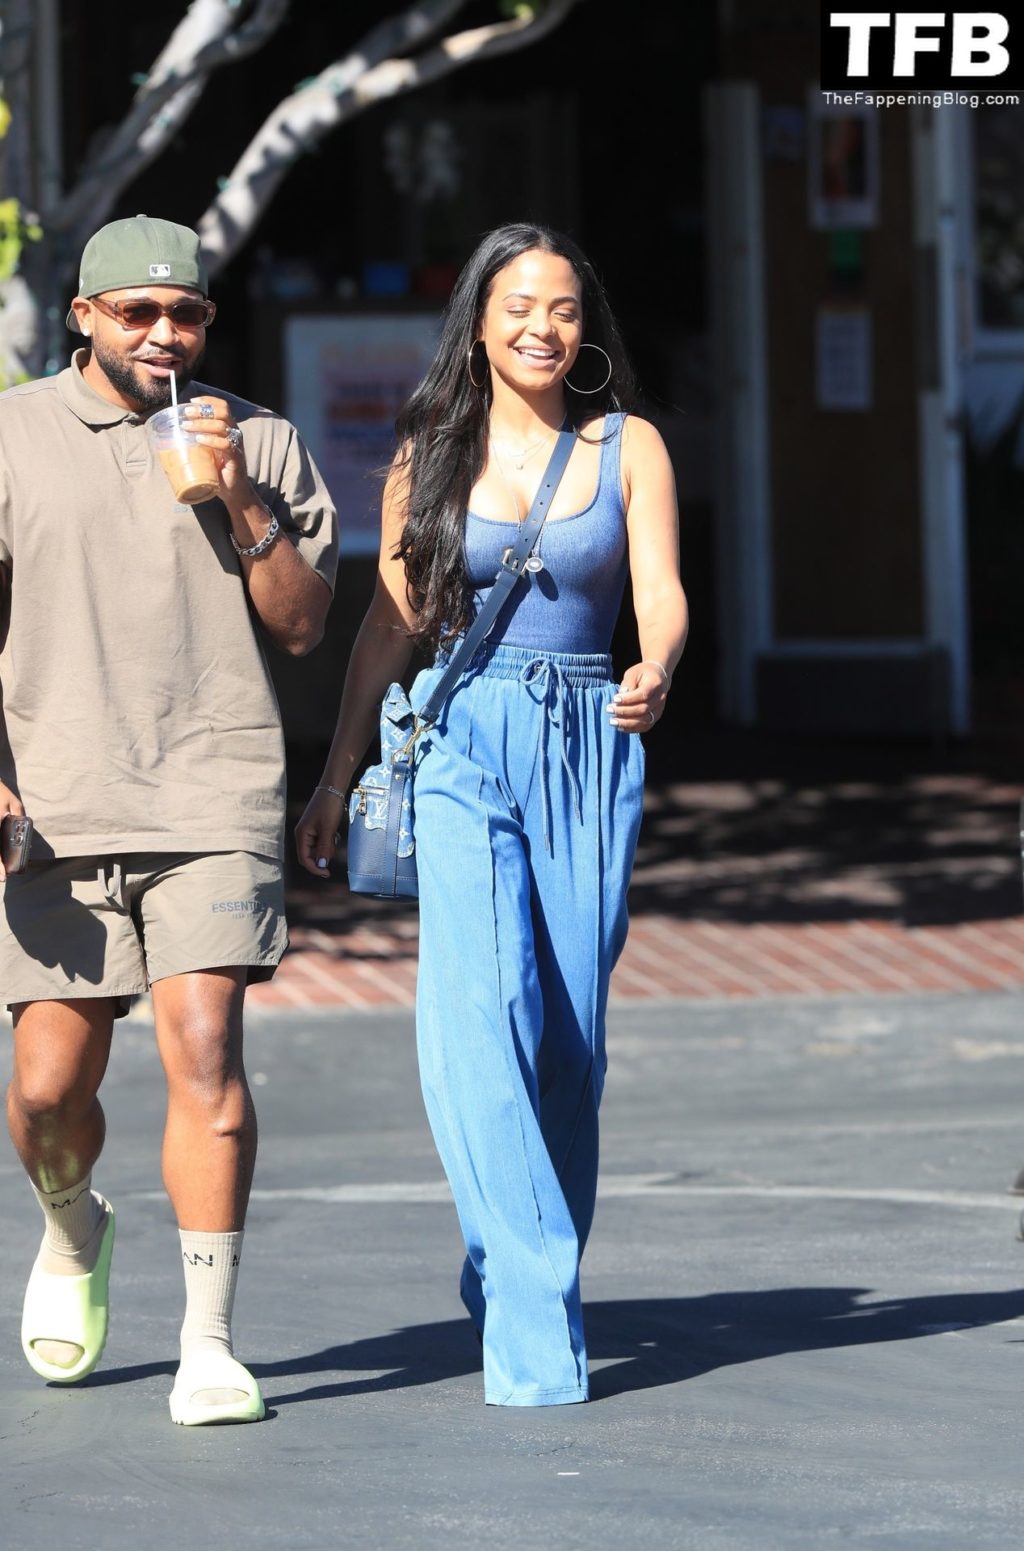 Christina Milian Sexy The Fappening Blog 23 1024x1551 - Christina Milian Glows in All Denim with BFF J Ryan La Cour (24 Photos)